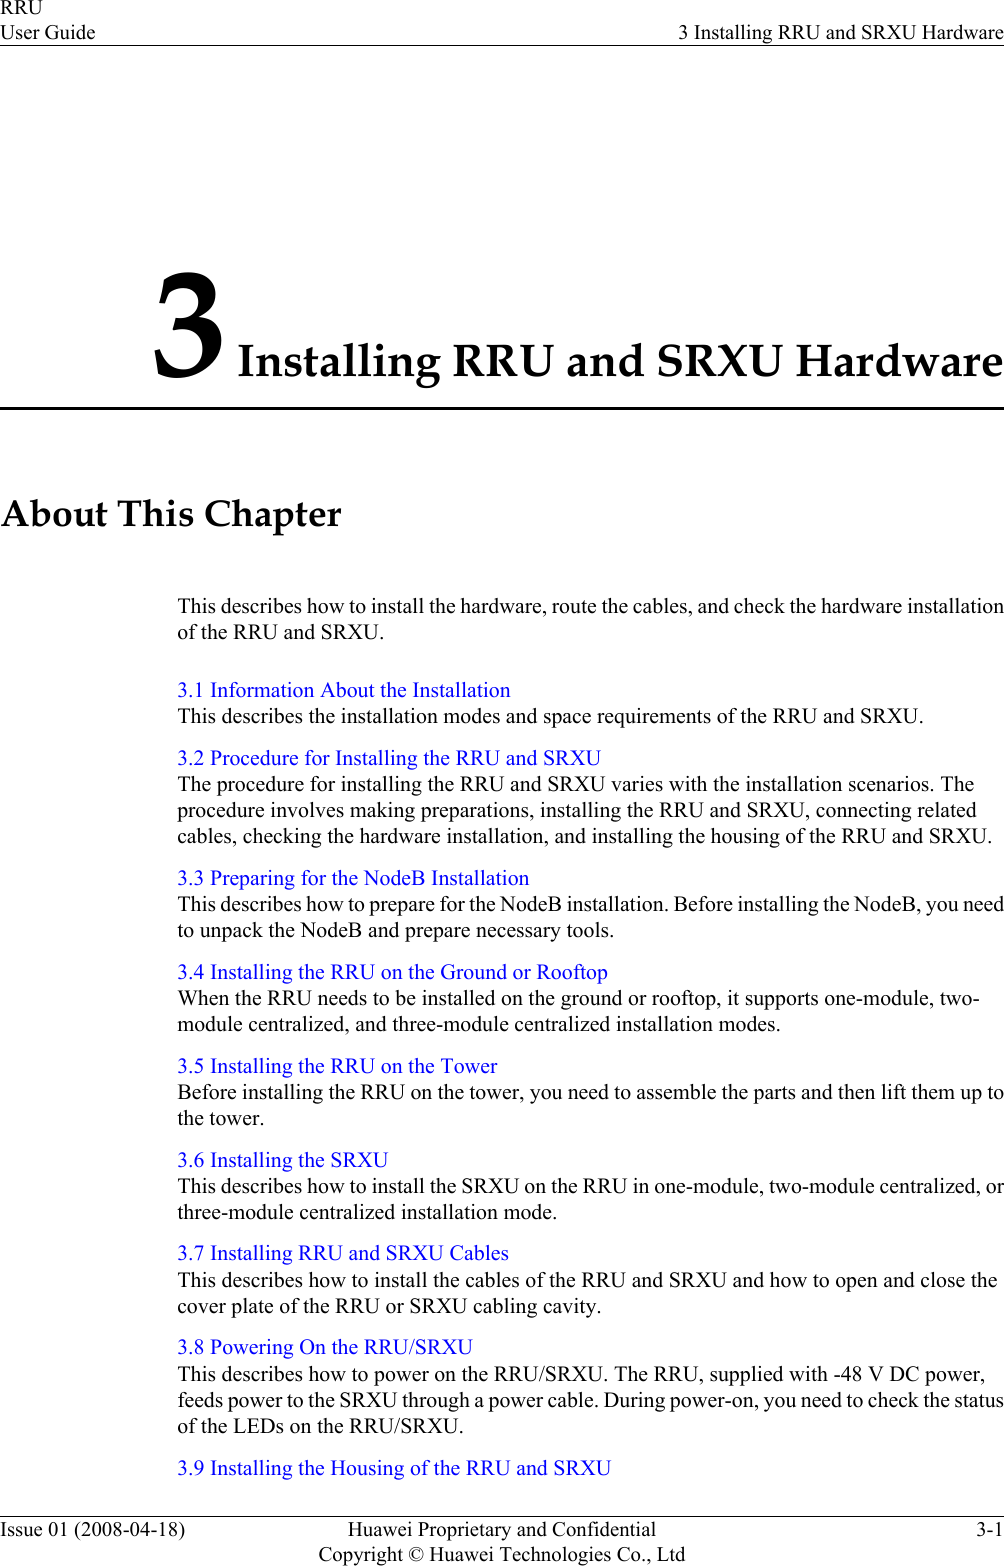 3 Installing RRU and SRXU HardwareAbout This ChapterThis describes how to install the hardware, route the cables, and check the hardware installationof the RRU and SRXU.3.1 Information About the InstallationThis describes the installation modes and space requirements of the RRU and SRXU.3.2 Procedure for Installing the RRU and SRXUThe procedure for installing the RRU and SRXU varies with the installation scenarios. Theprocedure involves making preparations, installing the RRU and SRXU, connecting relatedcables, checking the hardware installation, and installing the housing of the RRU and SRXU.3.3 Preparing for the NodeB InstallationThis describes how to prepare for the NodeB installation. Before installing the NodeB, you needto unpack the NodeB and prepare necessary tools.3.4 Installing the RRU on the Ground or RooftopWhen the RRU needs to be installed on the ground or rooftop, it supports one-module, two-module centralized, and three-module centralized installation modes.3.5 Installing the RRU on the TowerBefore installing the RRU on the tower, you need to assemble the parts and then lift them up tothe tower.3.6 Installing the SRXUThis describes how to install the SRXU on the RRU in one-module, two-module centralized, orthree-module centralized installation mode.3.7 Installing RRU and SRXU CablesThis describes how to install the cables of the RRU and SRXU and how to open and close thecover plate of the RRU or SRXU cabling cavity.3.8 Powering On the RRU/SRXUThis describes how to power on the RRU/SRXU. The RRU, supplied with -48 V DC power,feeds power to the SRXU through a power cable. During power-on, you need to check the statusof the LEDs on the RRU/SRXU.3.9 Installing the Housing of the RRU and SRXURRUUser Guide 3 Installing RRU and SRXU HardwareIssue 01 (2008-04-18) Huawei Proprietary and ConfidentialCopyright © Huawei Technologies Co., Ltd3-1